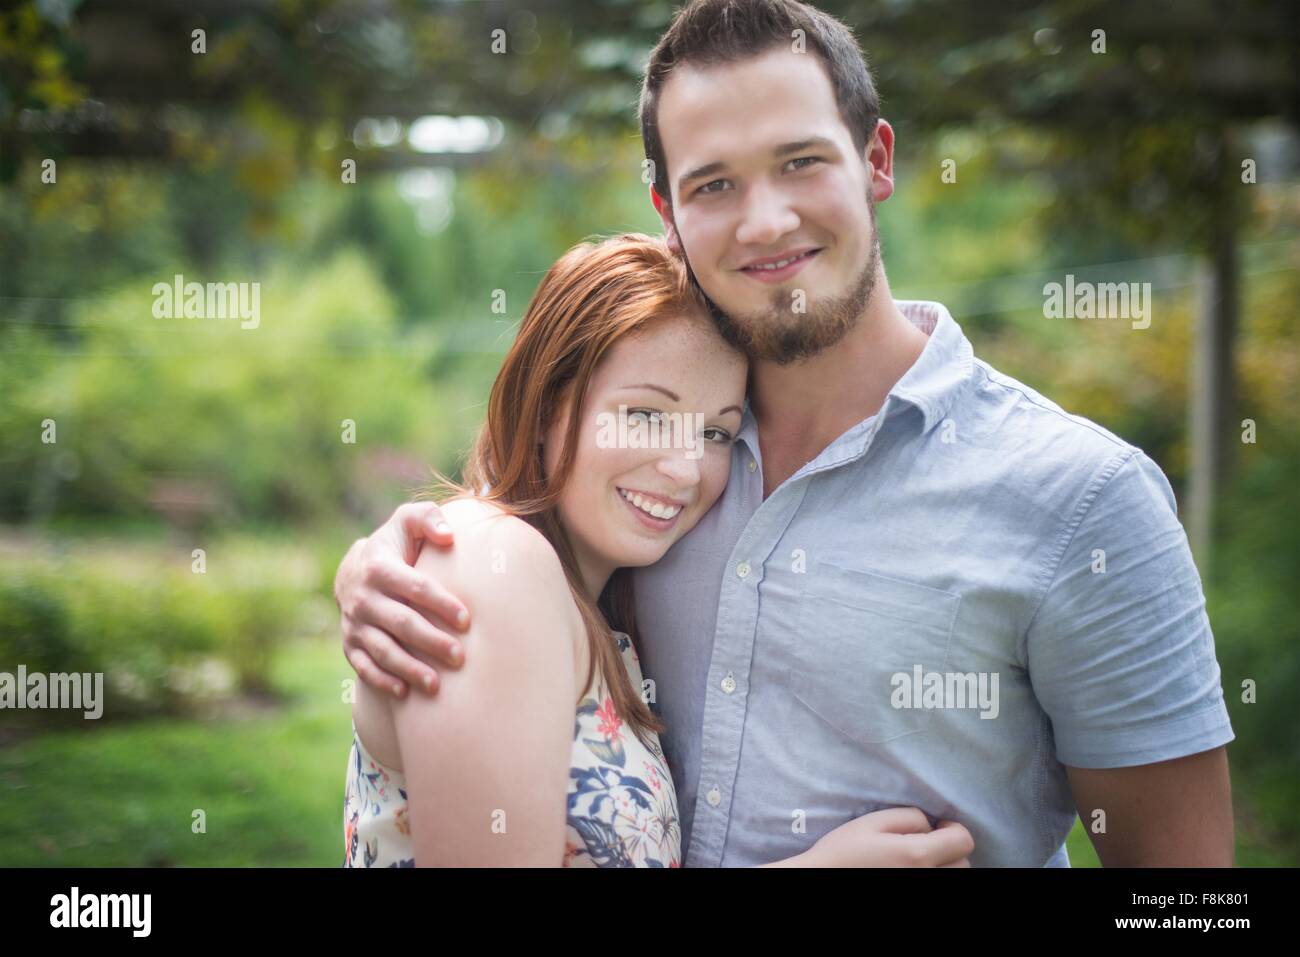 Portrait of couple hugging, looking at camera smiling Stock Photo